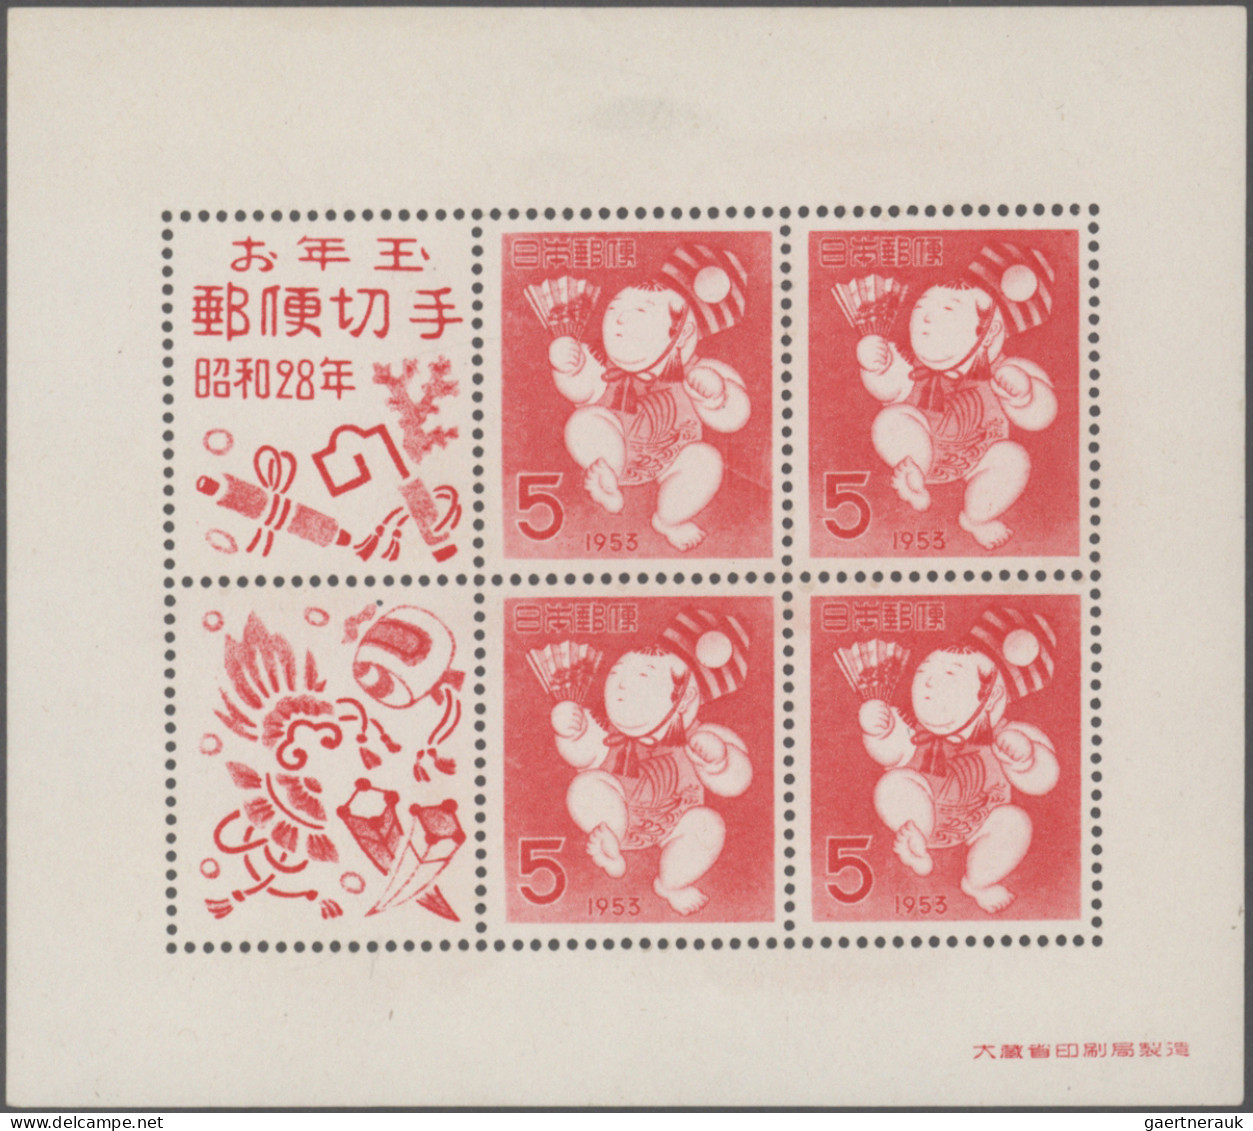 Japan: 1947/1989 (approx.), comprehensive dealer stock of post-war s/s in well-f